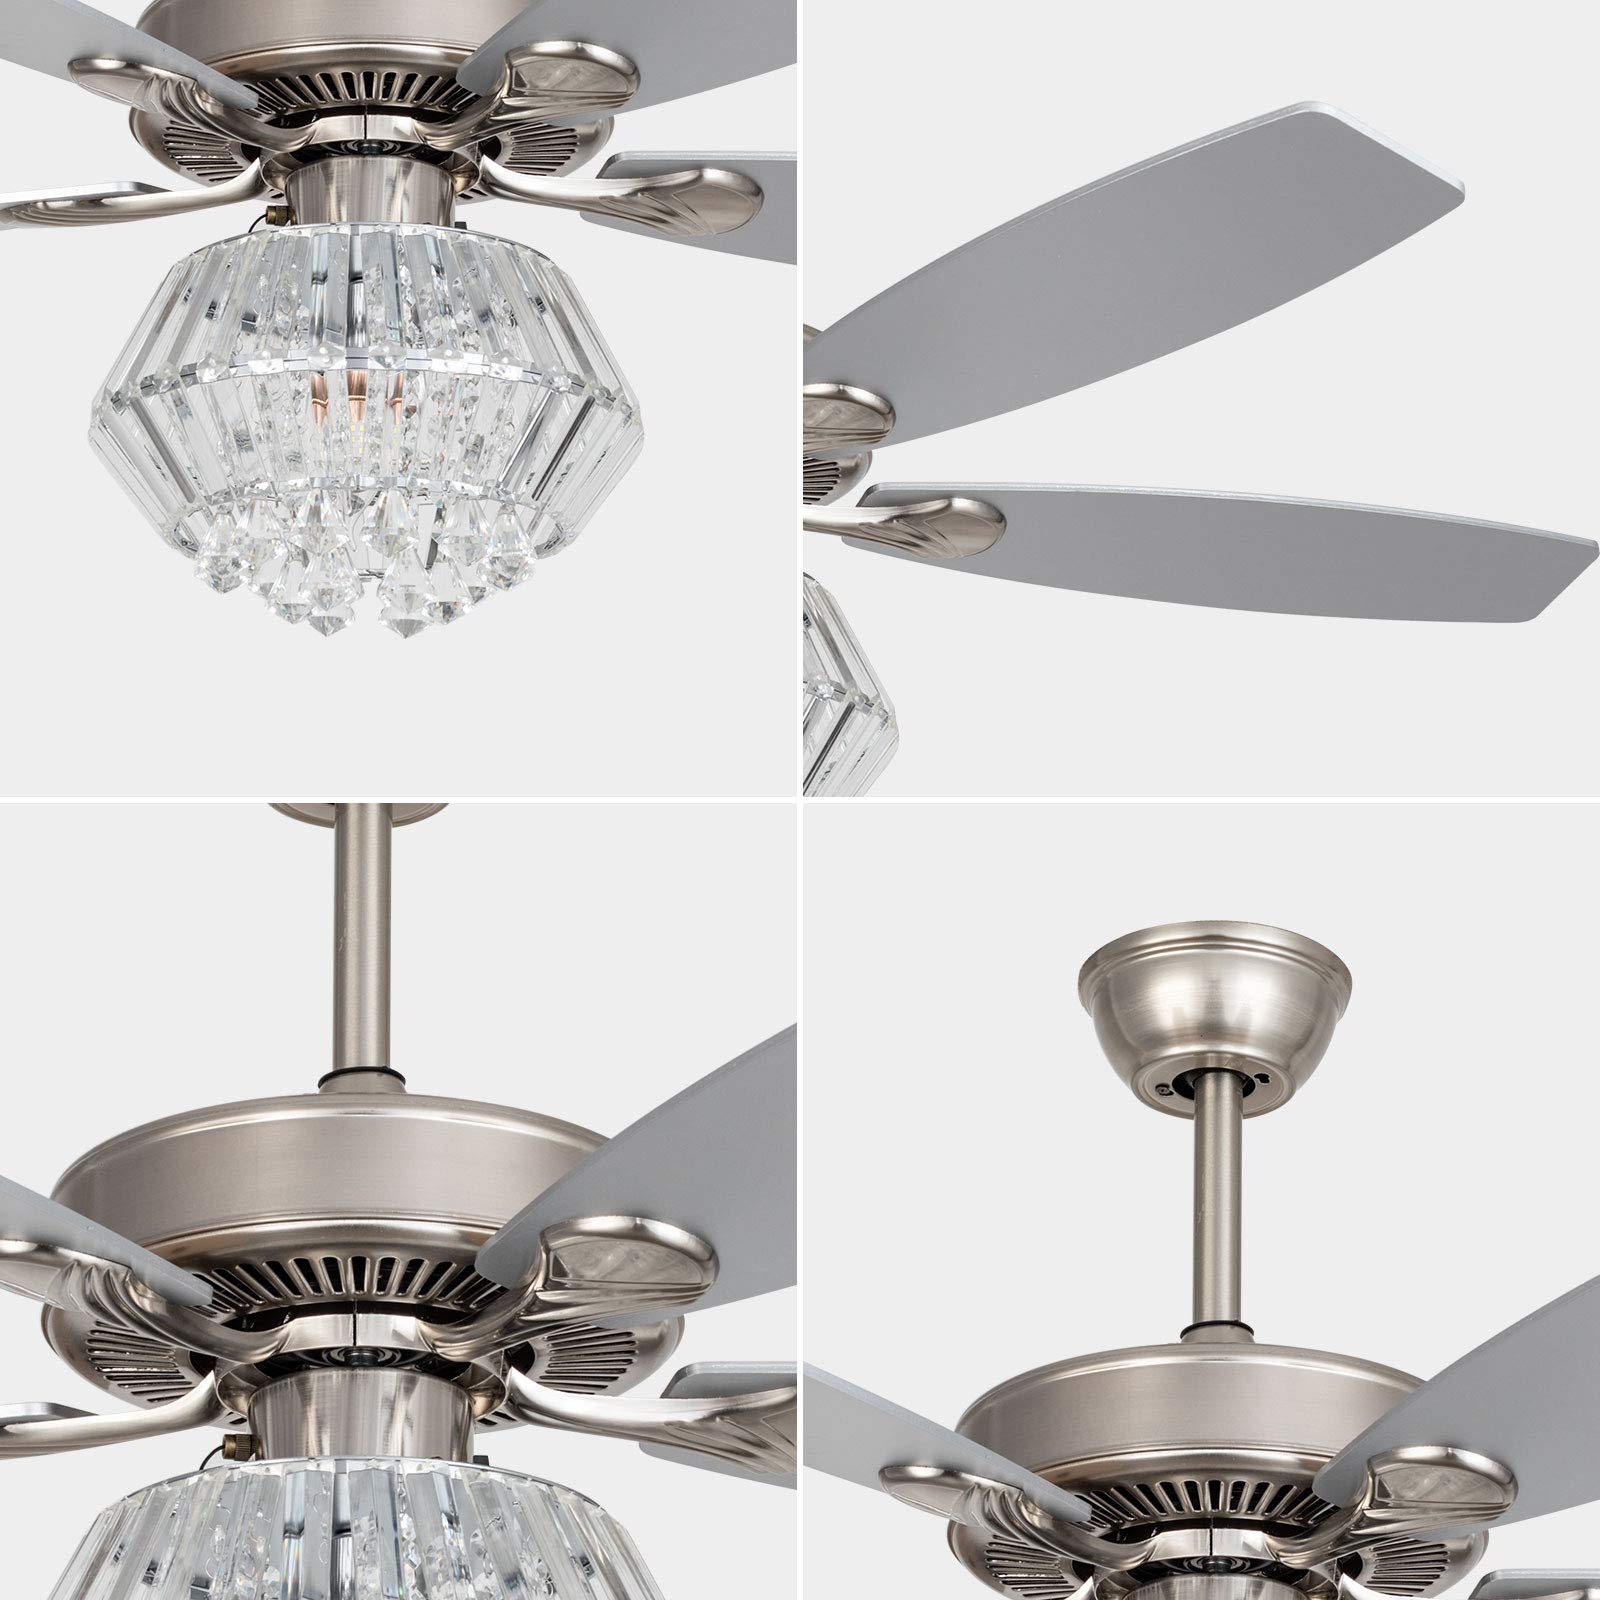 Chandelier crystal ceiling fan light with remote control, 52 inches 5 wood leaf part